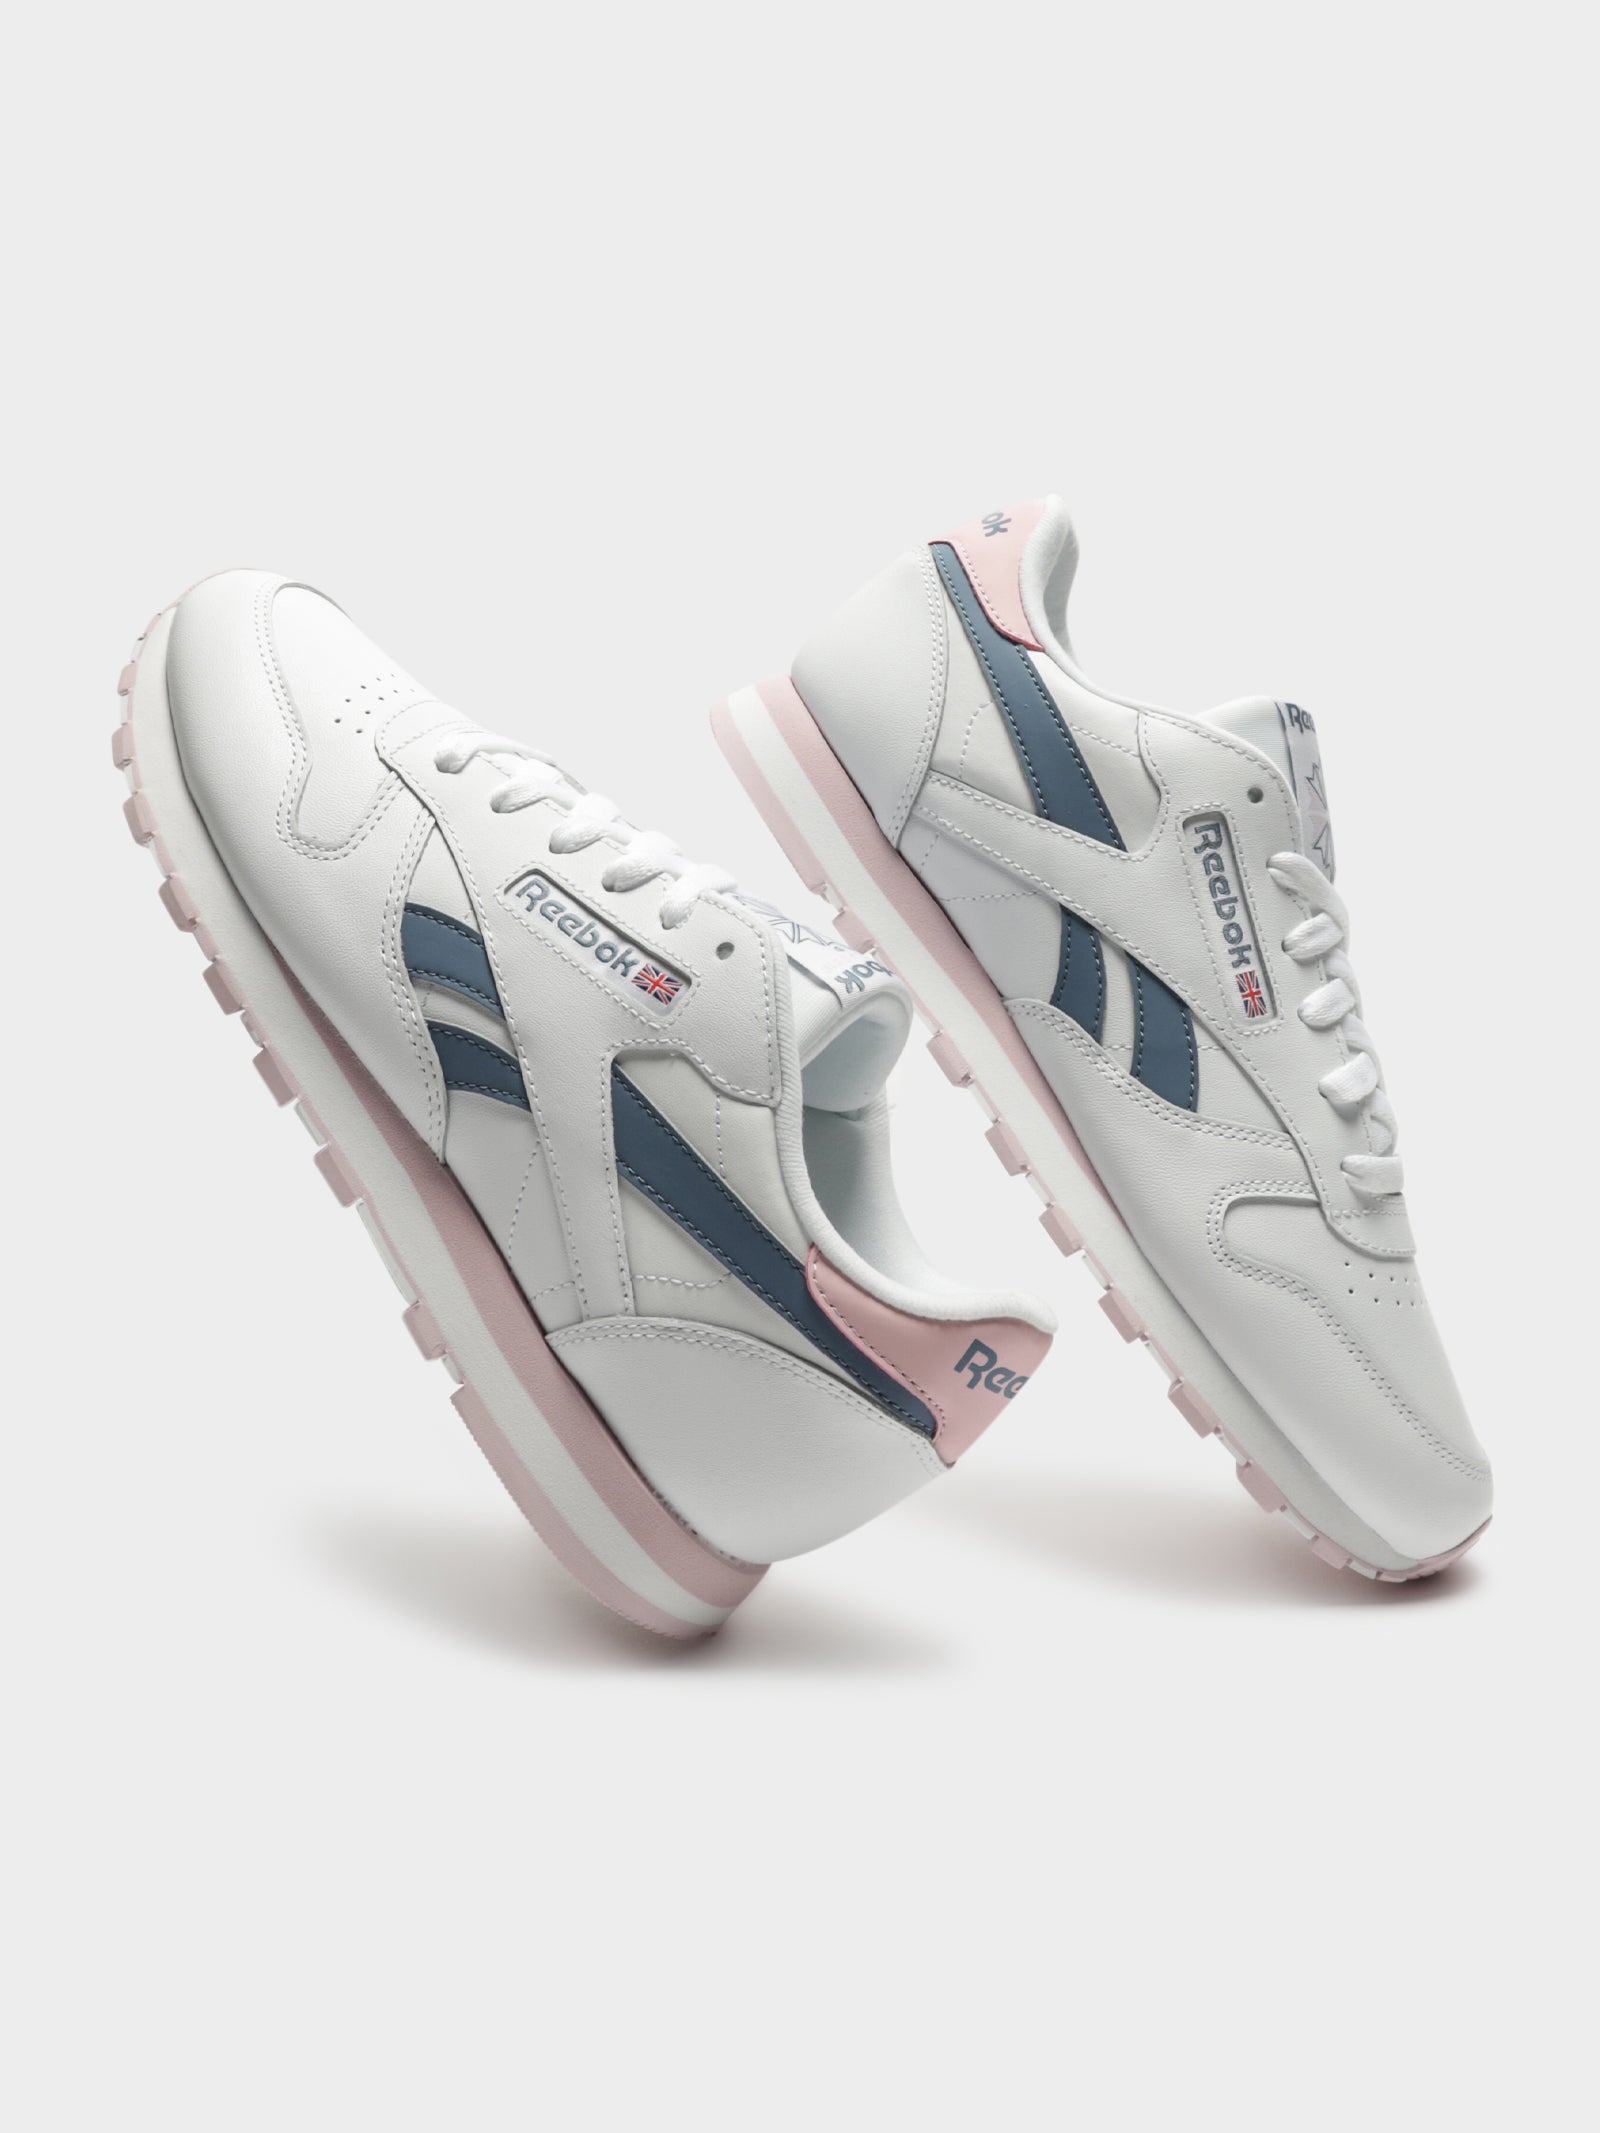 Womens Classic Leather Sneakers in White & Pink